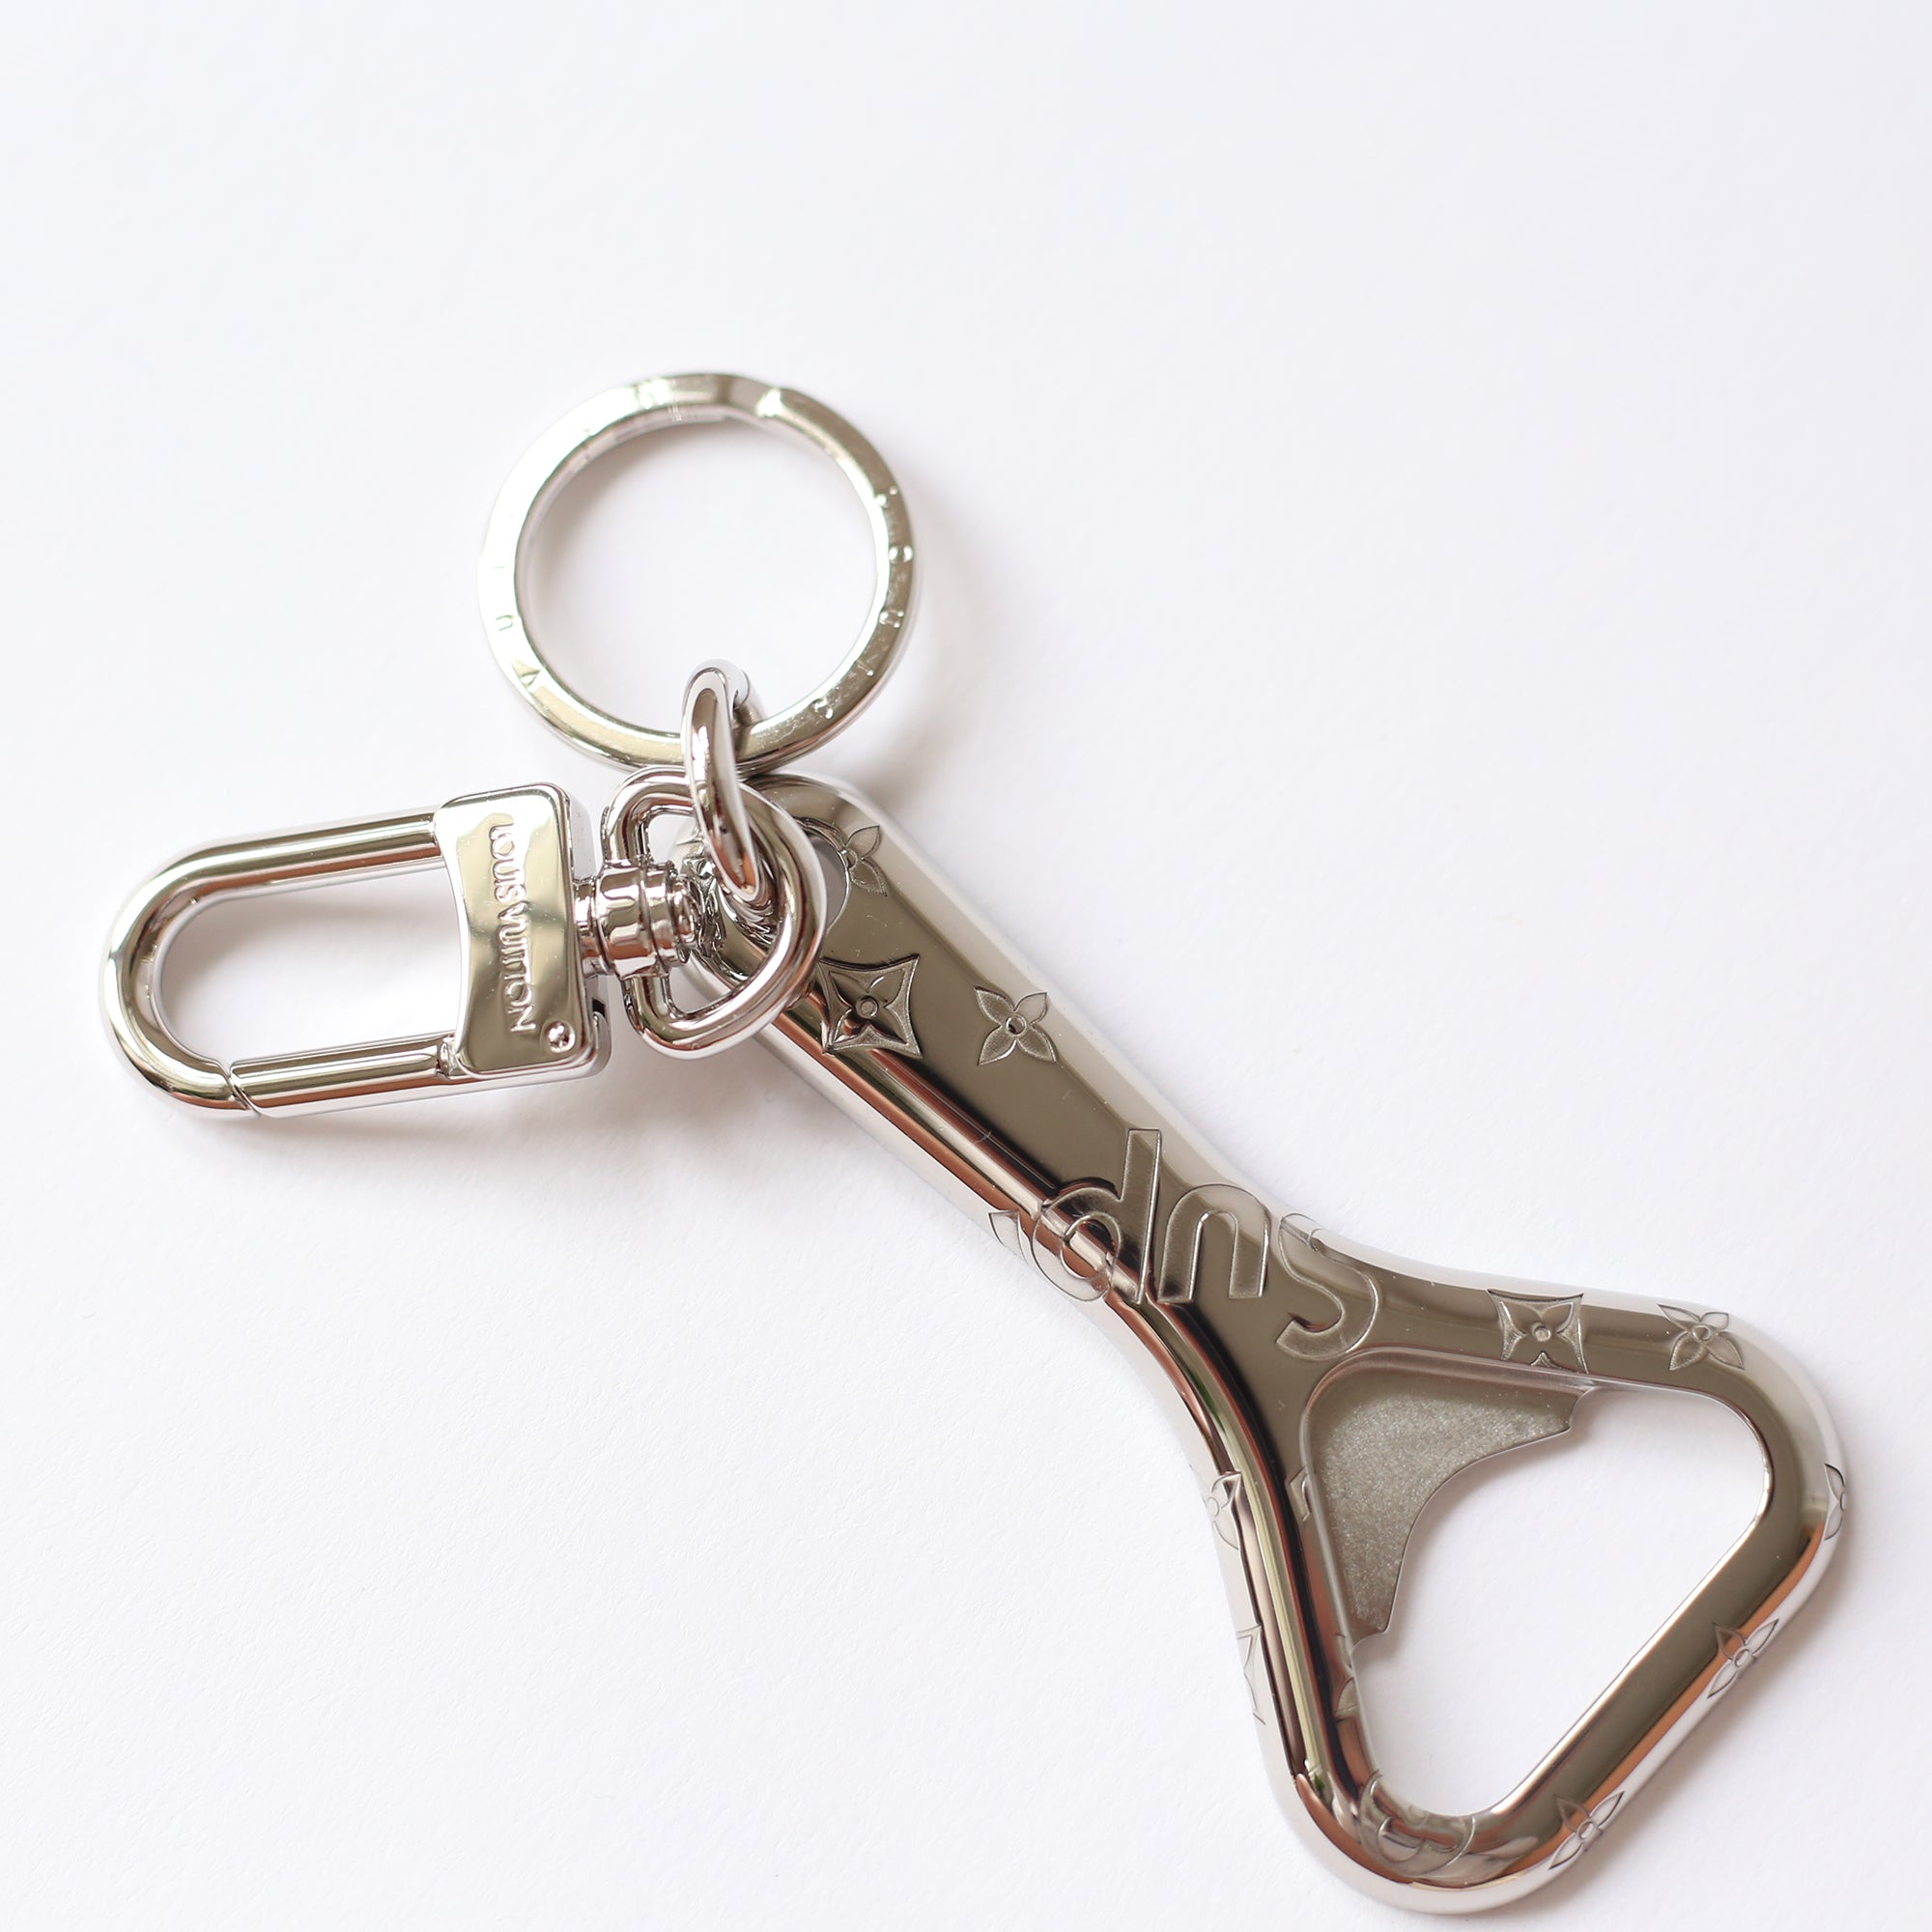 LV or GG keychain bottle opener – Big Will Made It